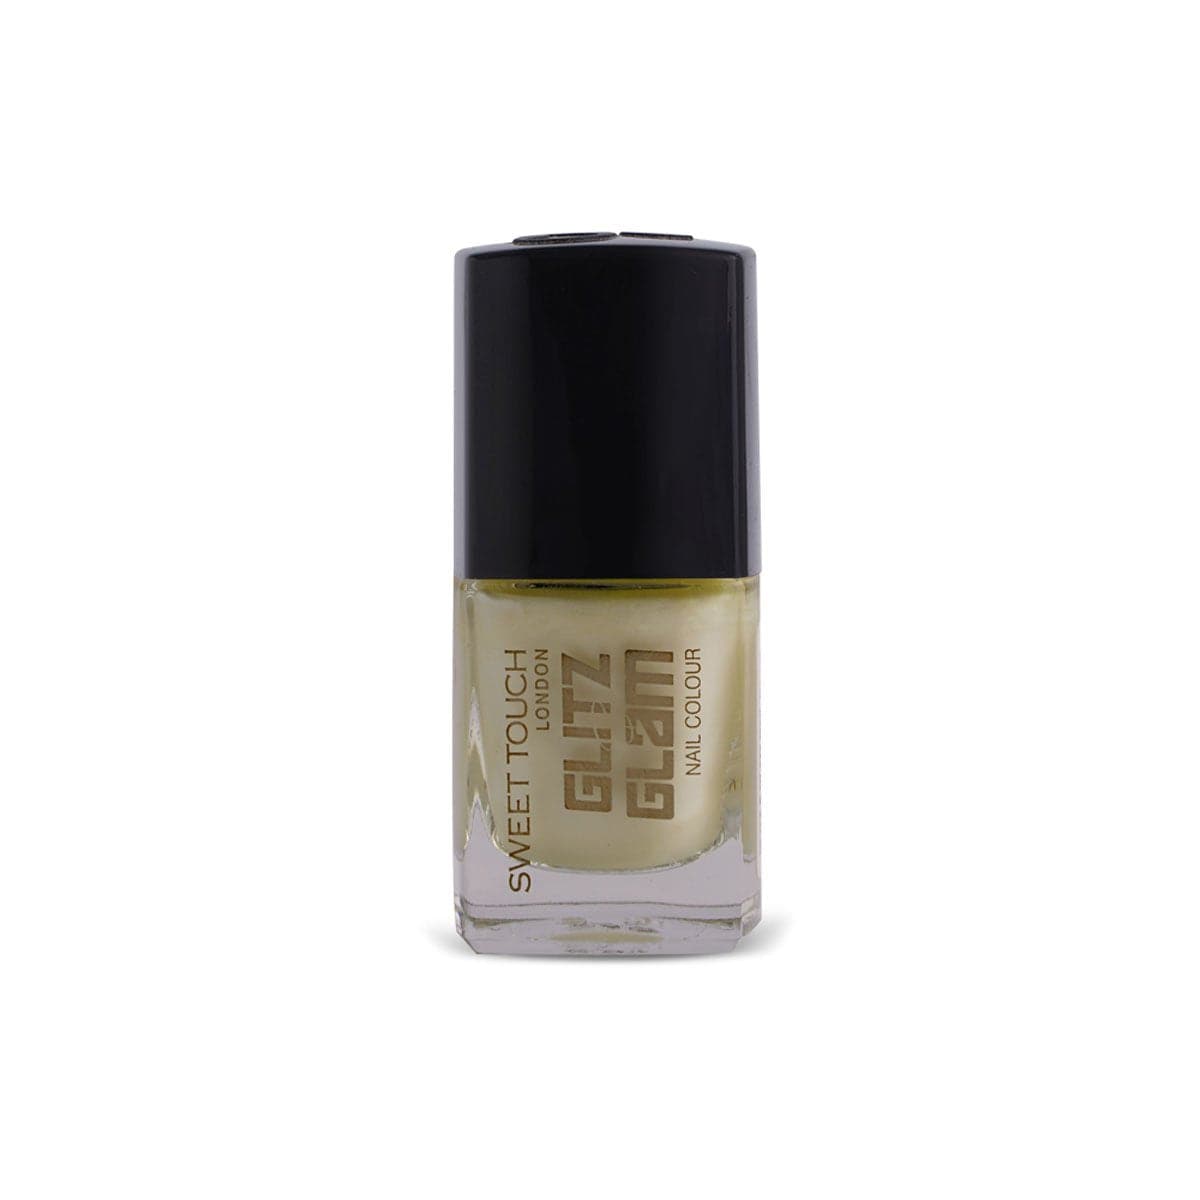 ST London Glitz & Glam Nail Paint - St264 Oister Pearl - Premium Health & Beauty from St London - Just Rs 430.00! Shop now at Cozmetica